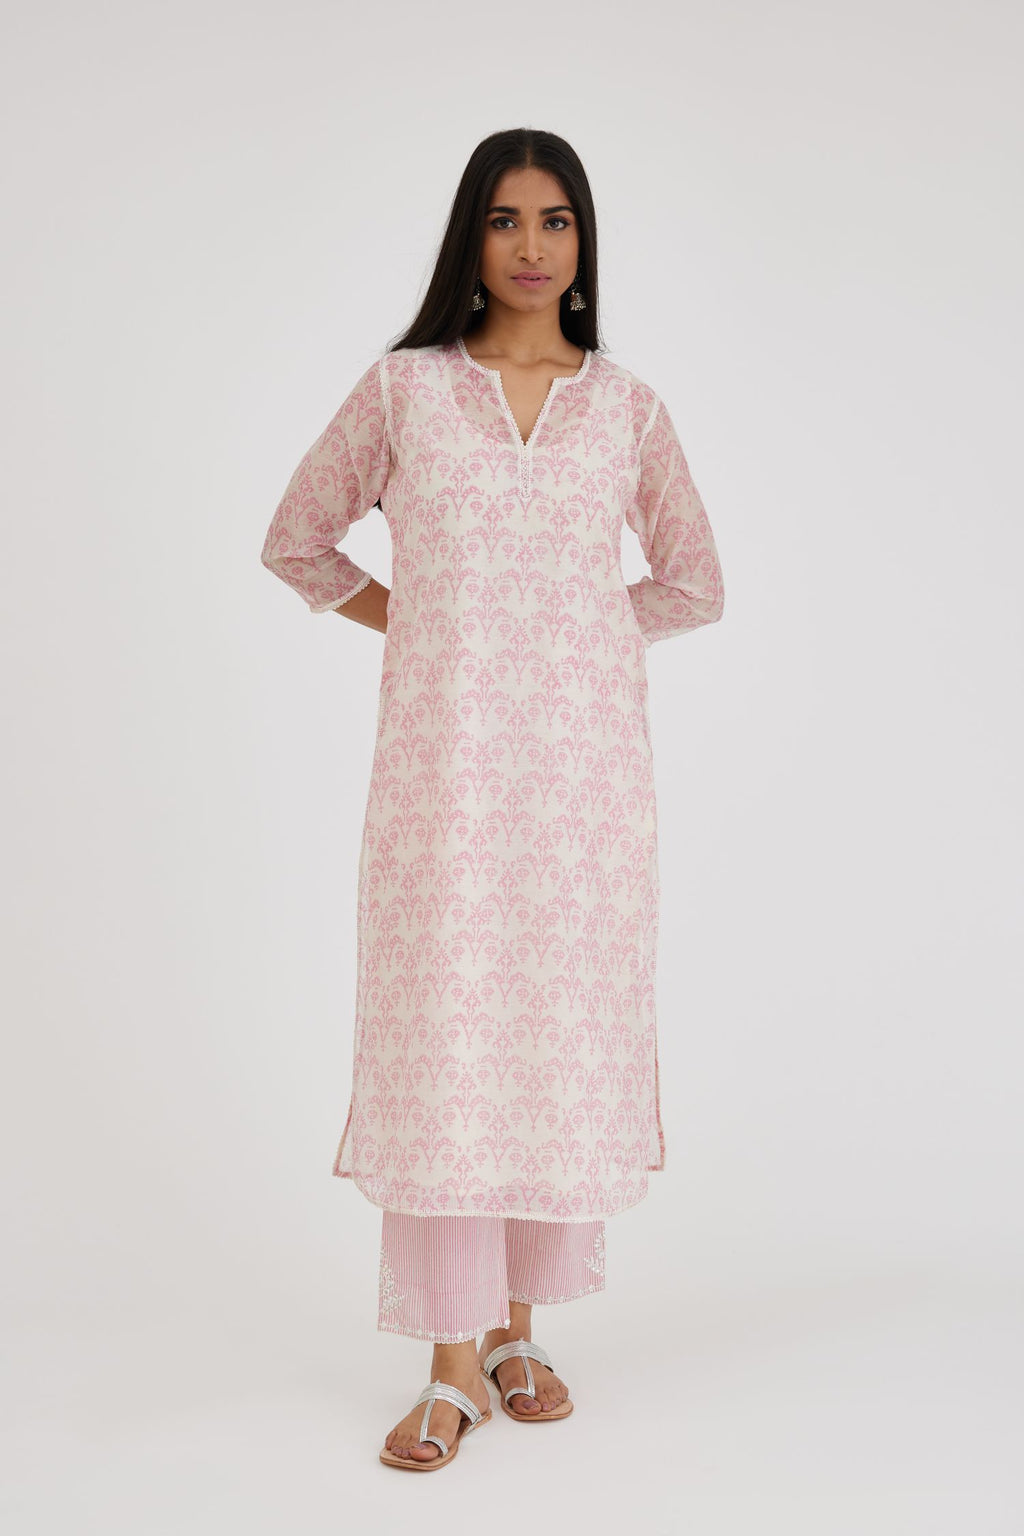 Ikat design pink and off white hand block-printed Cotton Chanderi straight long kurta set with off-white thread embroidery.